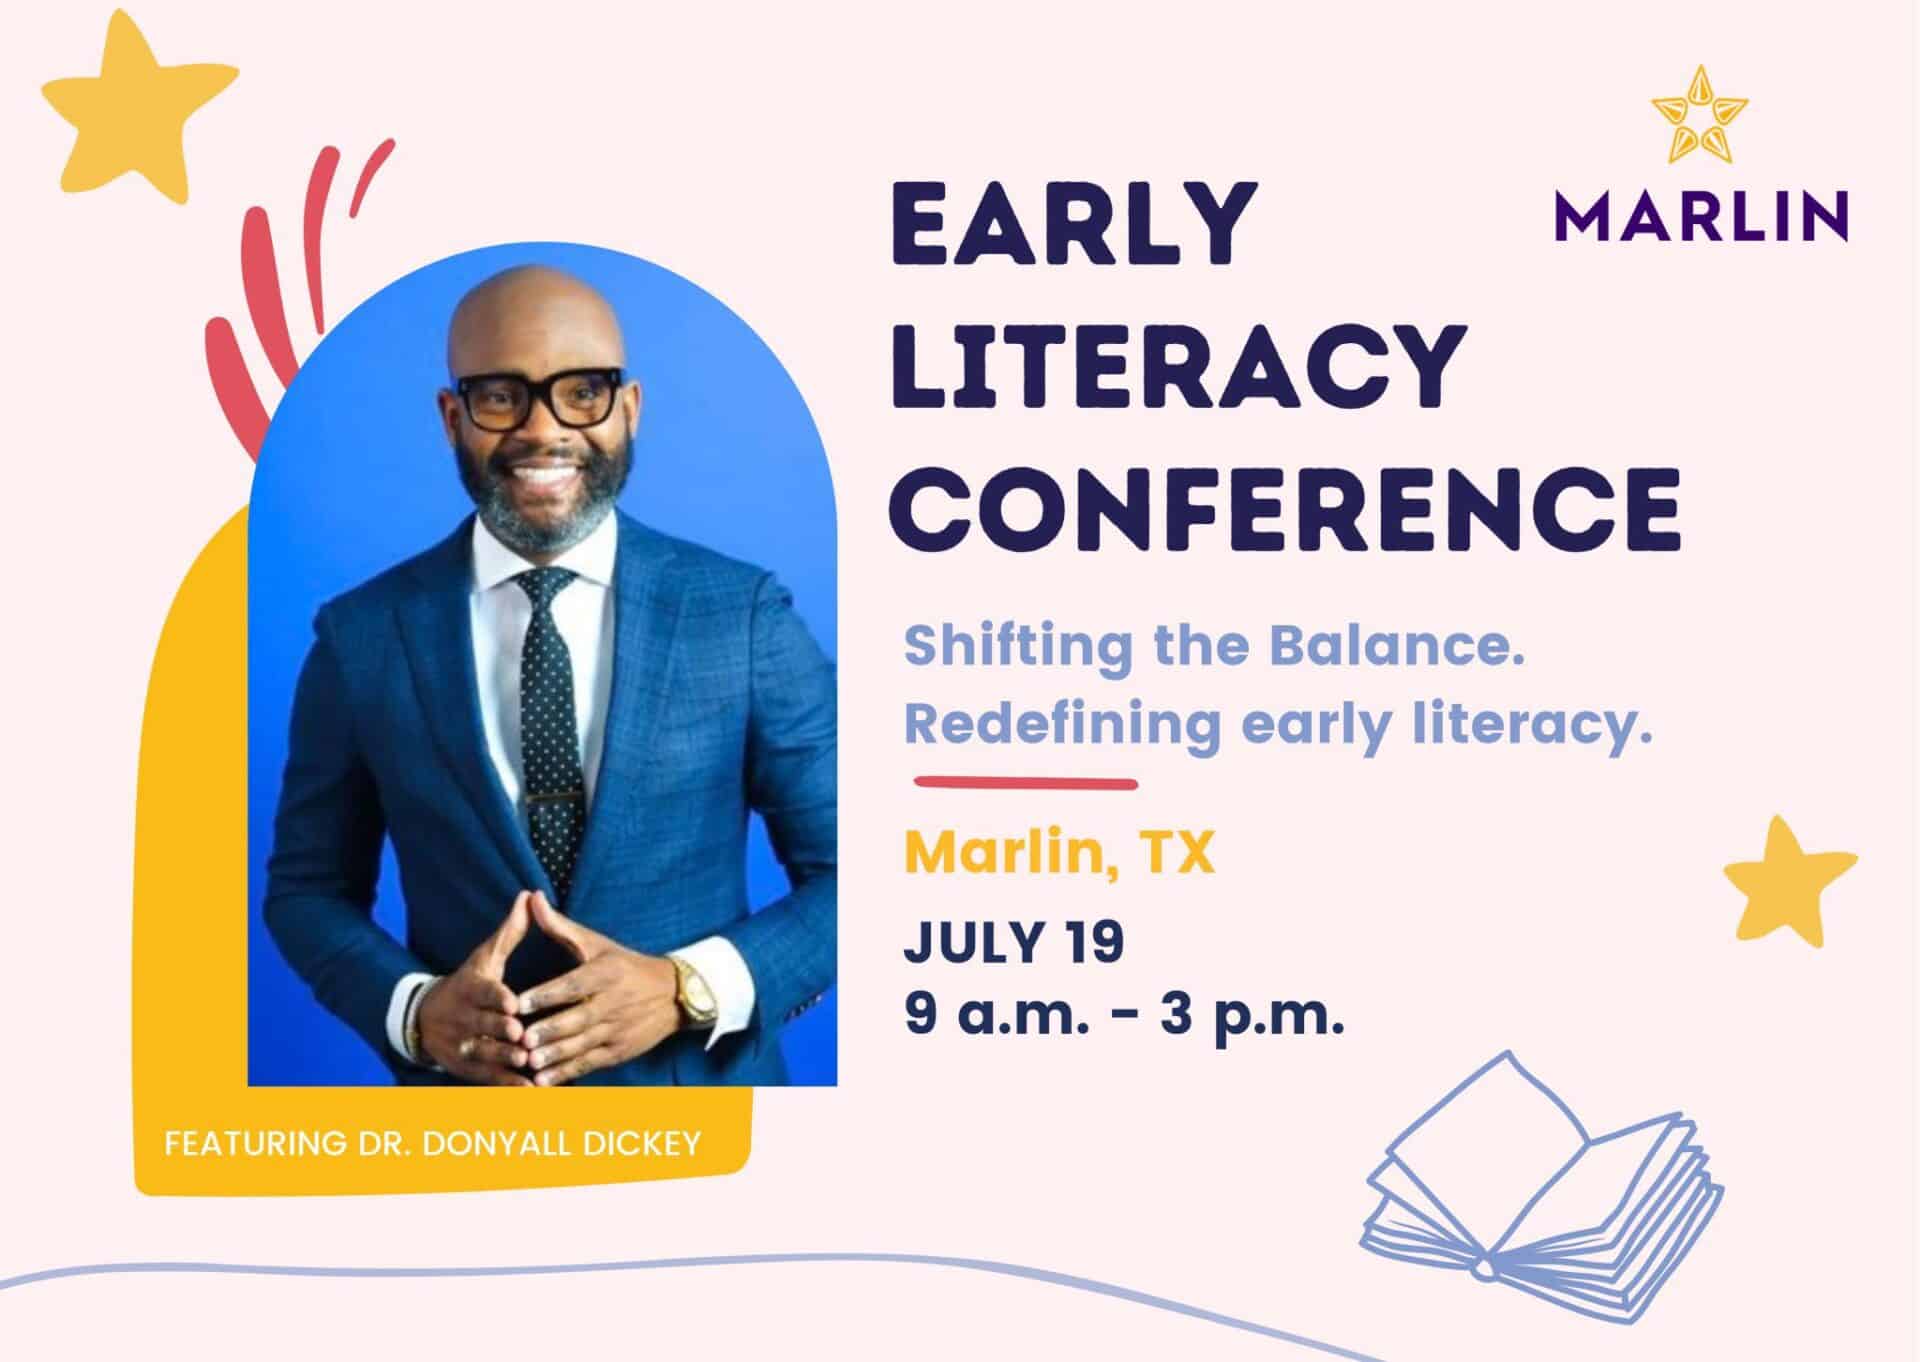 Marlin, TX Event Flyer showing Donyall Dickey's Early Literacy Conference